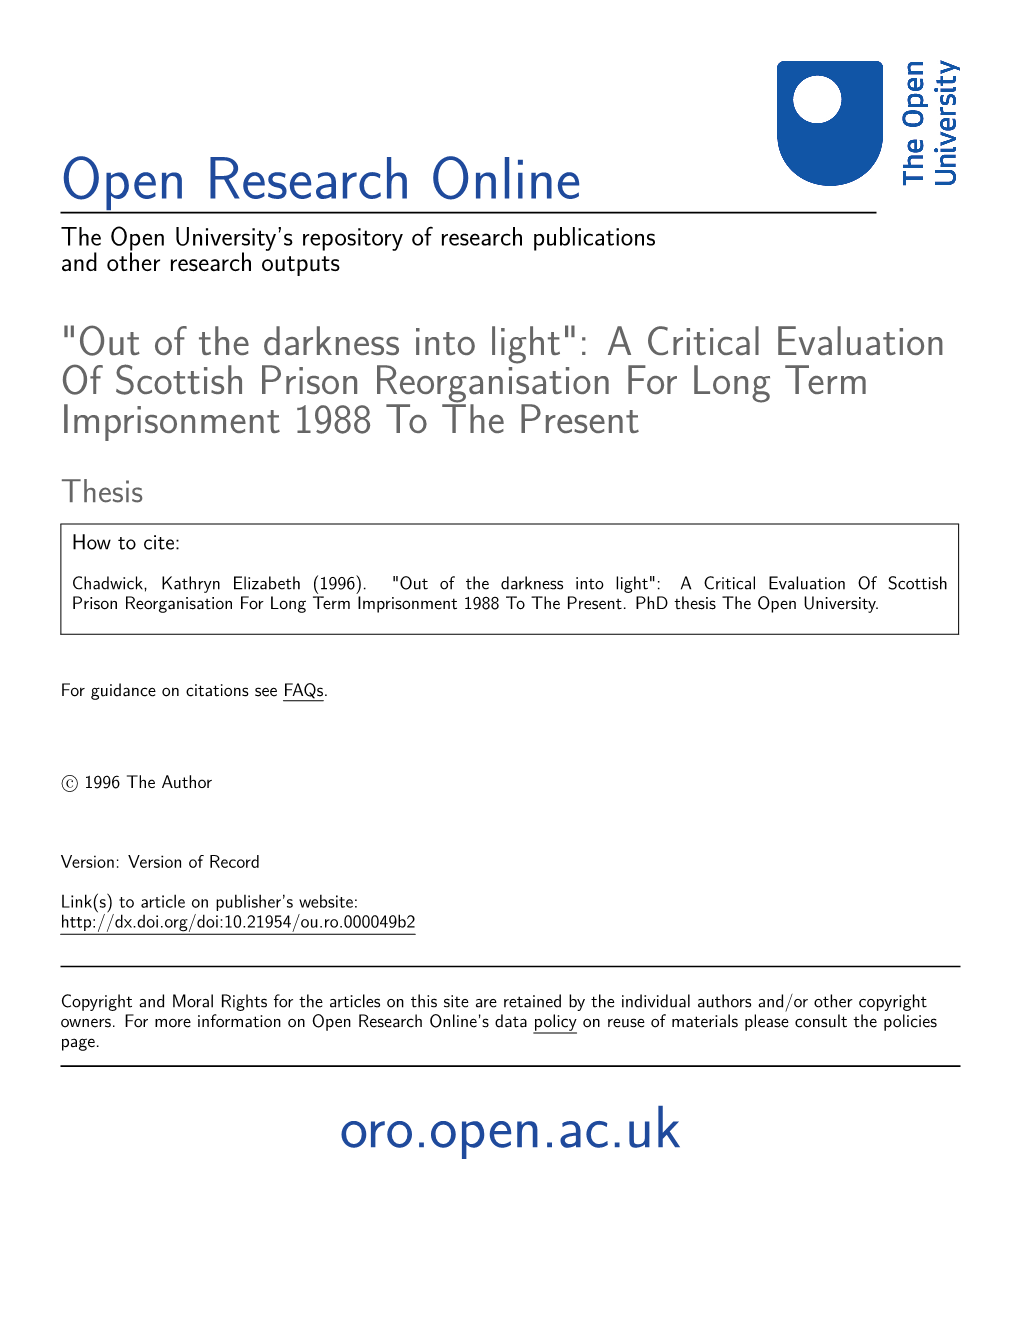 Out of the Darkness Into Light": a Critical Evaluation of Scottish Prison Reorganisation for Long Term Imprisonment 1988 to the Present